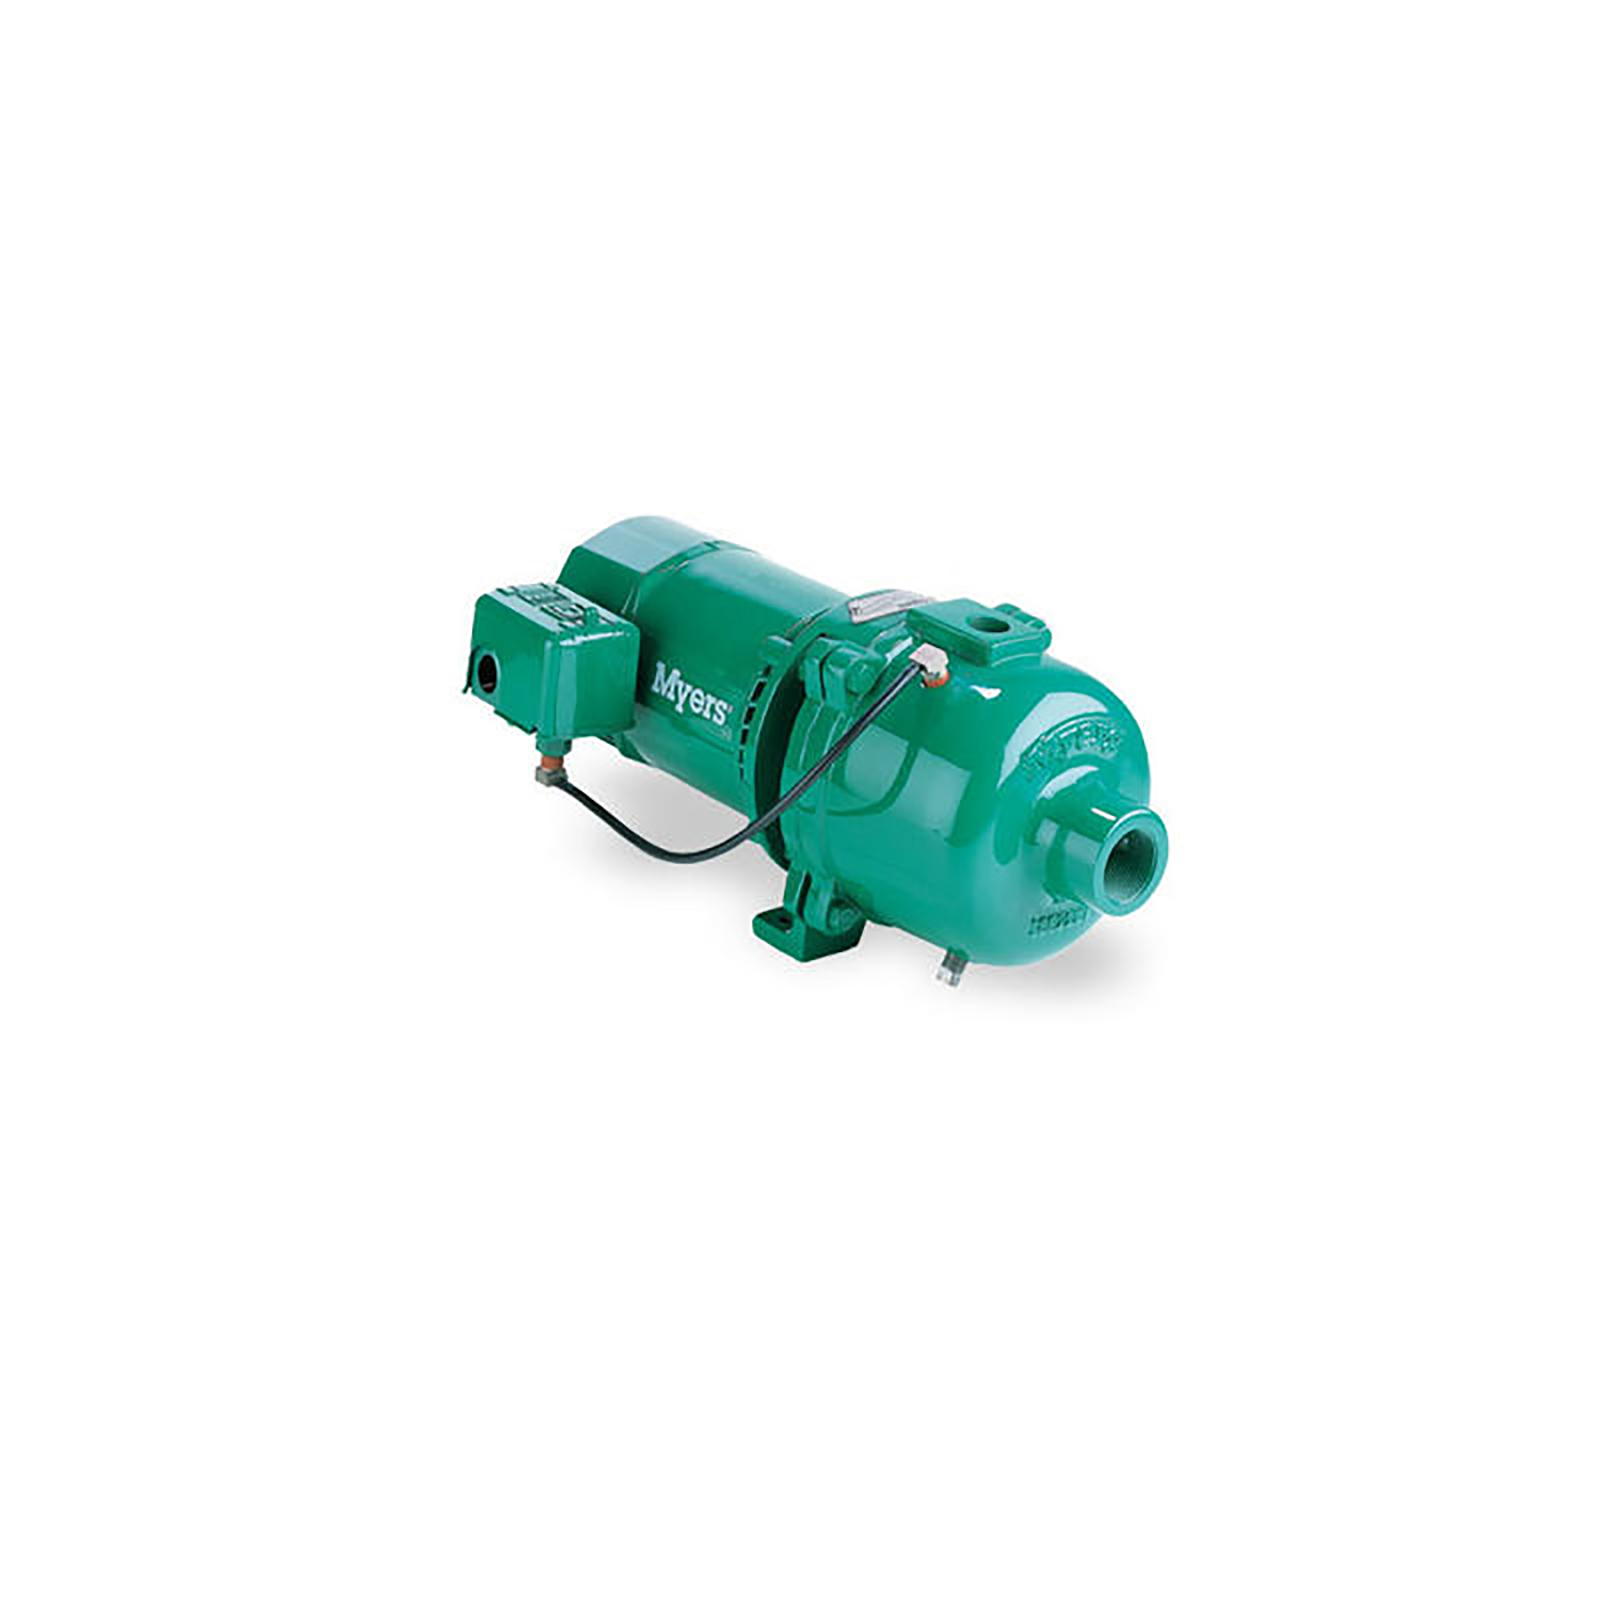 Fe Myers 1HP Shallow Well Jet Pump